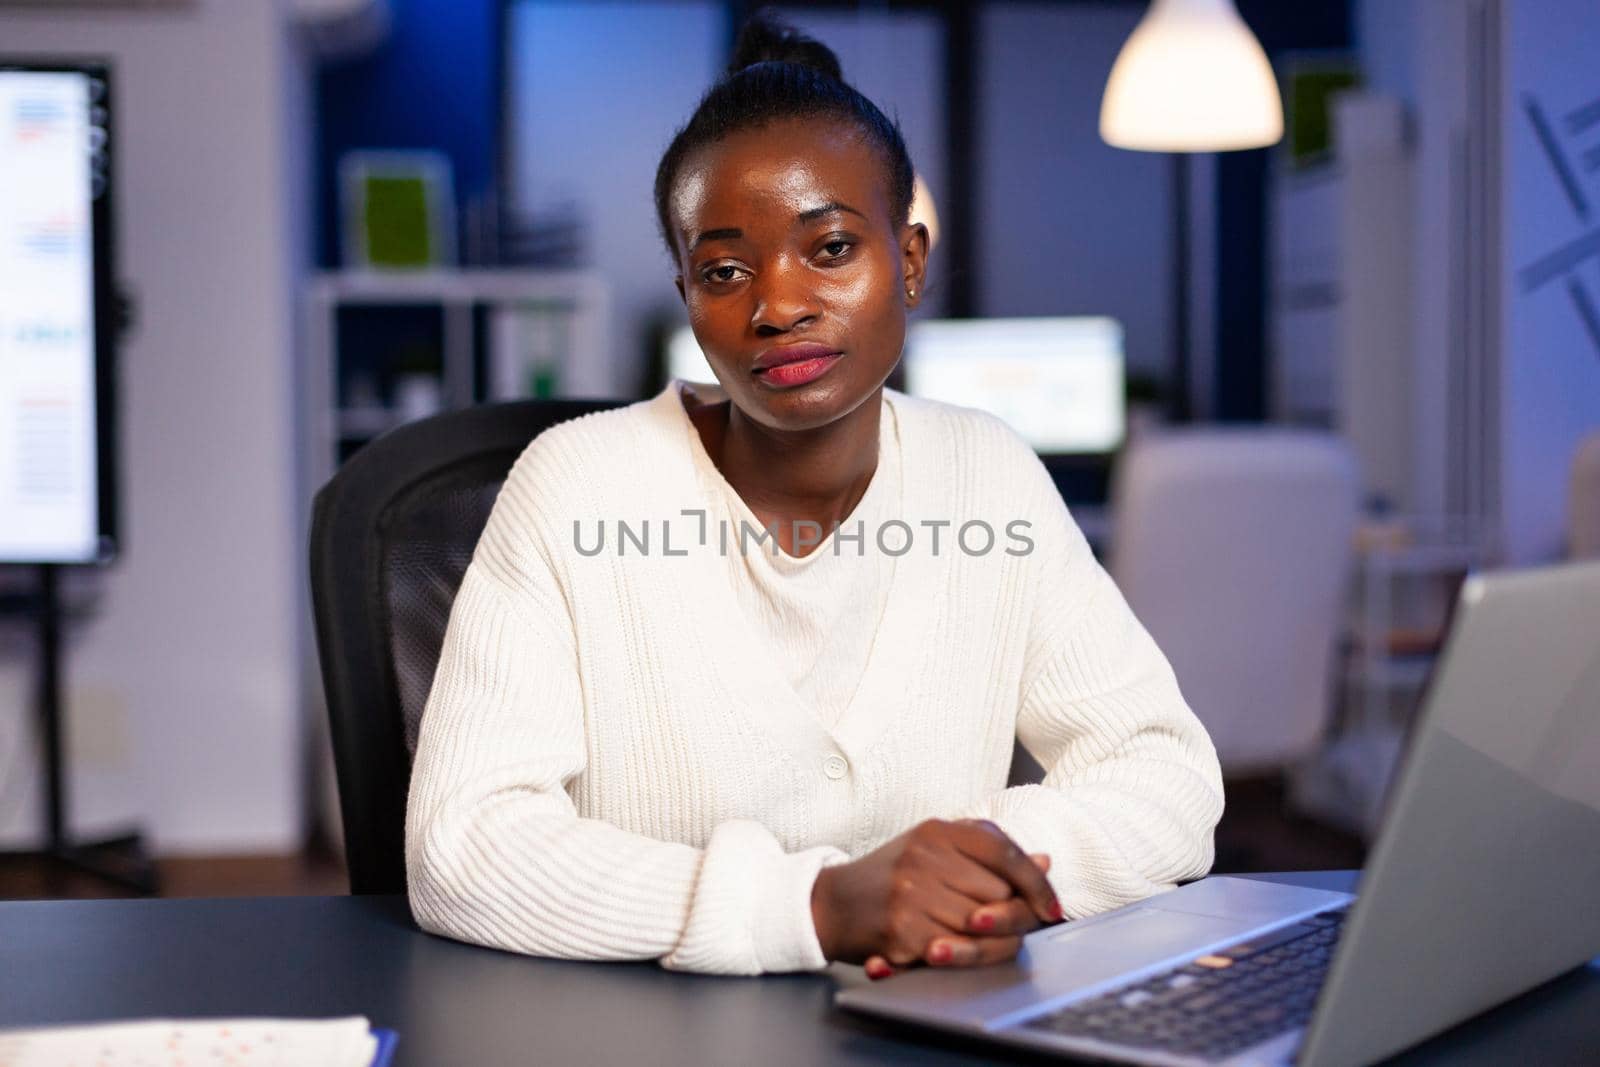 Focused tired business woman looking at camera after reading tasks on laptop sittting at desk in start-up company late at night. Employee doing overtime for job respecting deadline